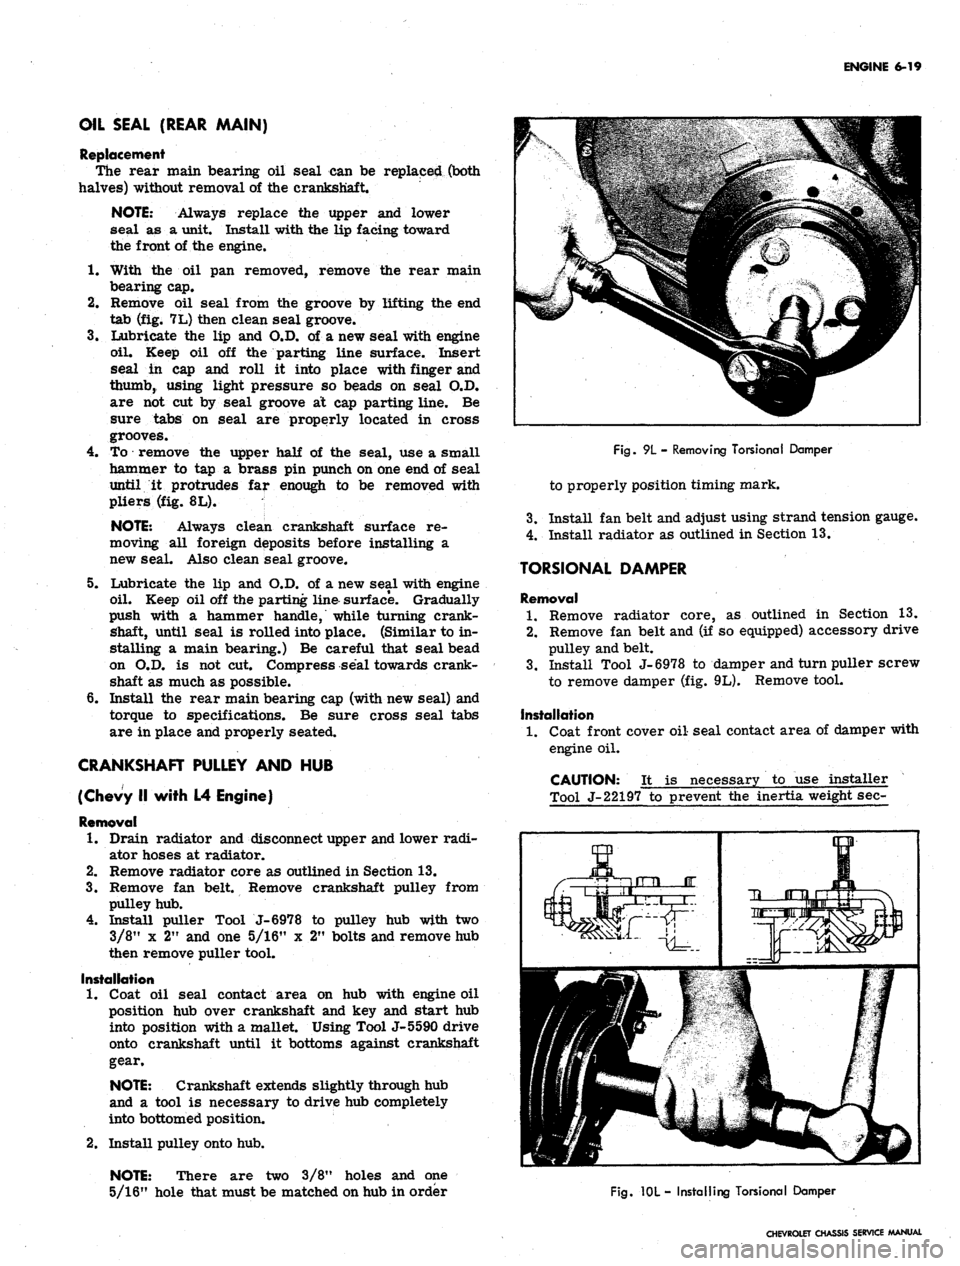 CHEVROLET CAMARO 1967 1.G Chassis Manual PDF 
ENGINE 6-19

OIL SEAL (REAR MAIN)

Replacement

The rear main bearing oil seal can be replaced (both

halves) without removal of the crankshaft.

NOTE:
 Always replace the upper and lower

seal as a 